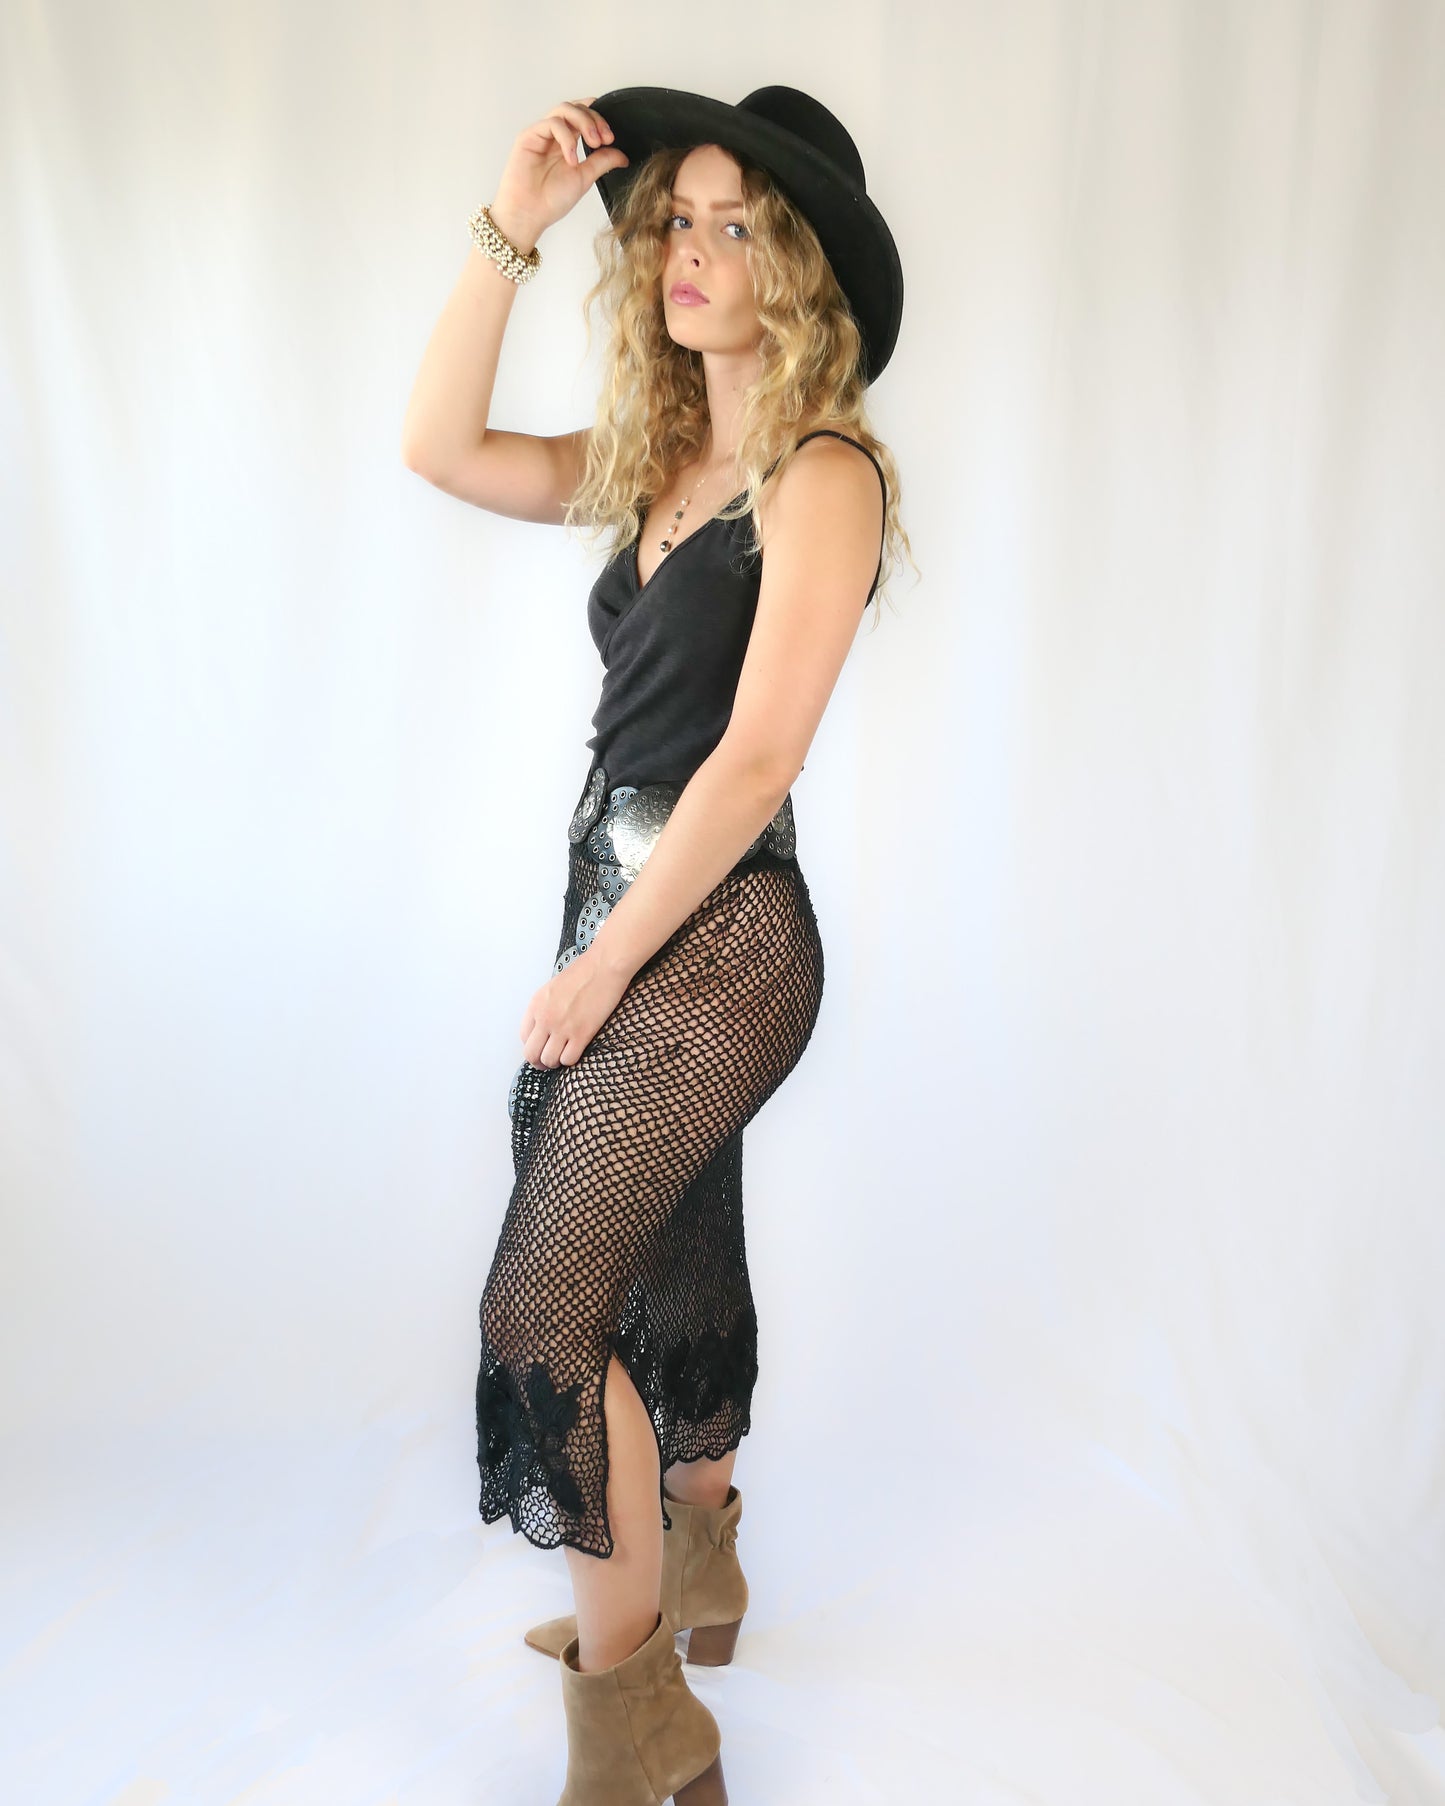 A Lim's Vintage 1980s original fishnet patterned skirt with intricate floral design and scalloped edging at the hem.  Provocative with a bohemian vibe, this hand crocheted skirt goes well with everything and comes with a comfortable elastic waistband.  Go rogue with boots and a cowboy hat, or wear it with heels and a silk camisole for a softer touch.    Size: First Small to Medium  Measurements:  Small to Medium  Waist 26"- 30" (elastic) Hip 40” Length 31” Color: Black  Material: 100% ramie